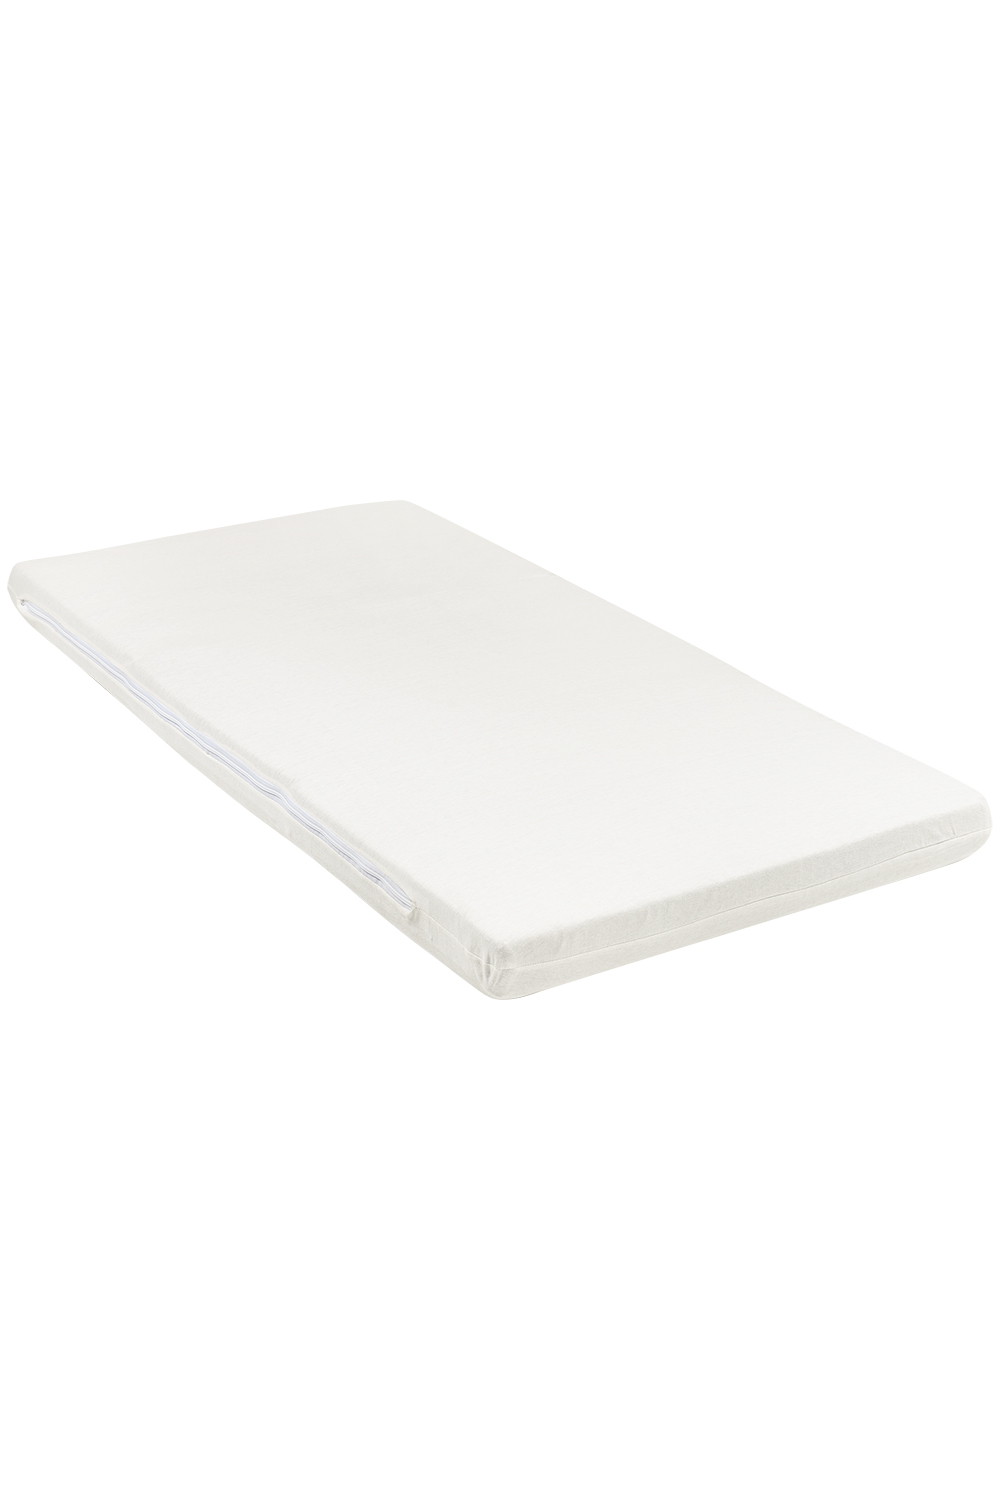 Jersey Campingbed Matrashoes DeLuxe - Offwhite - 60x120cm 